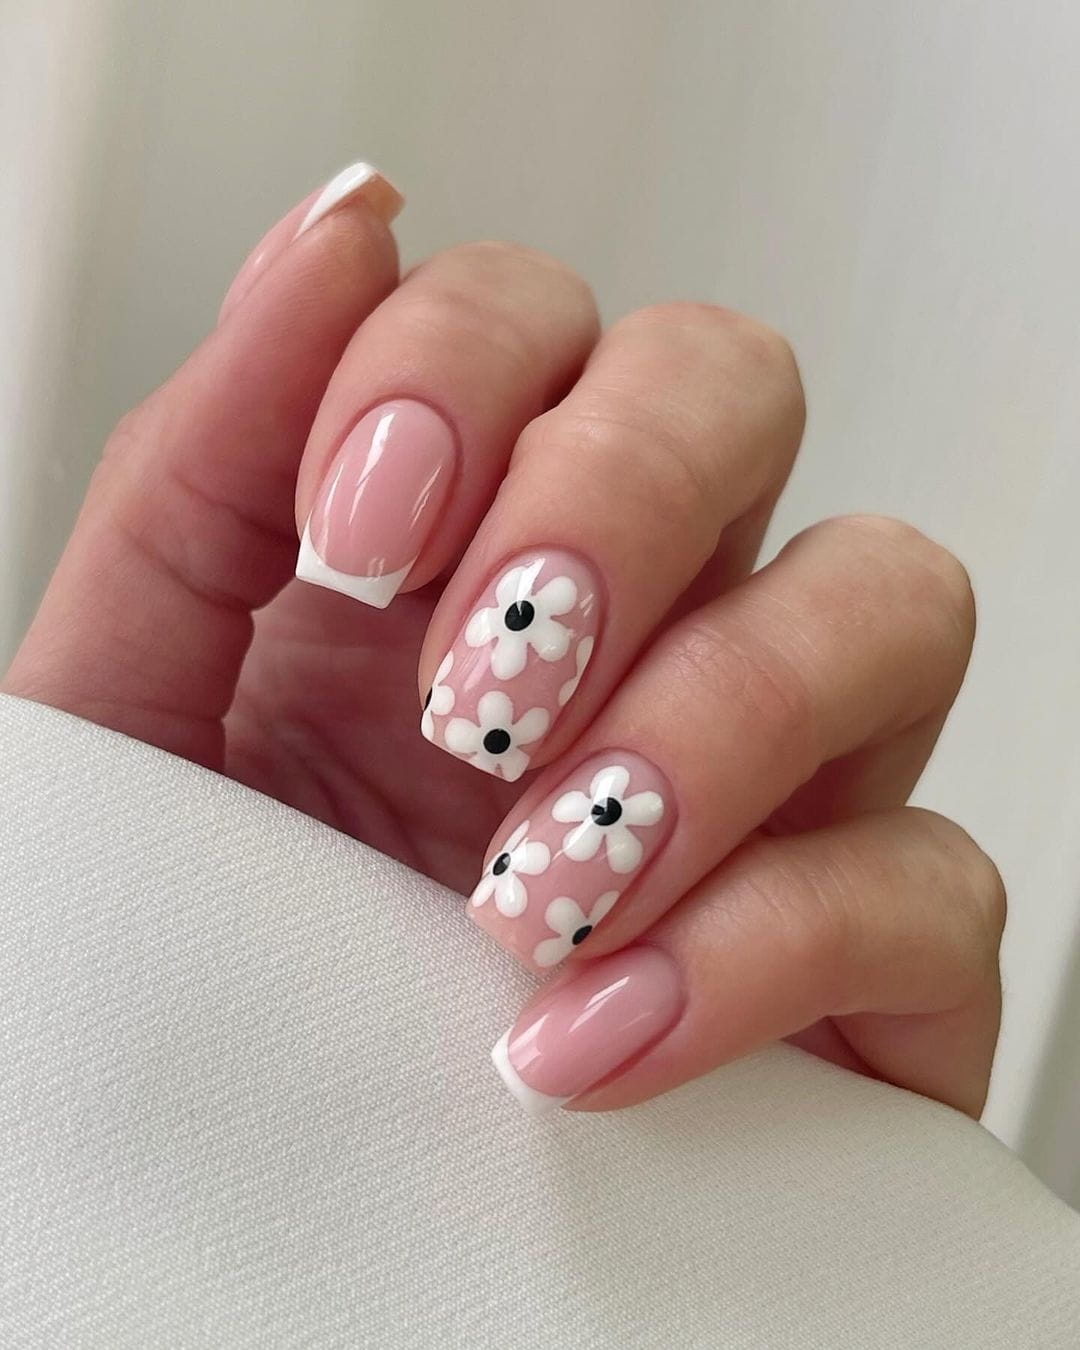 100 Pretty Spring Nail Designs To Try This Year images 64